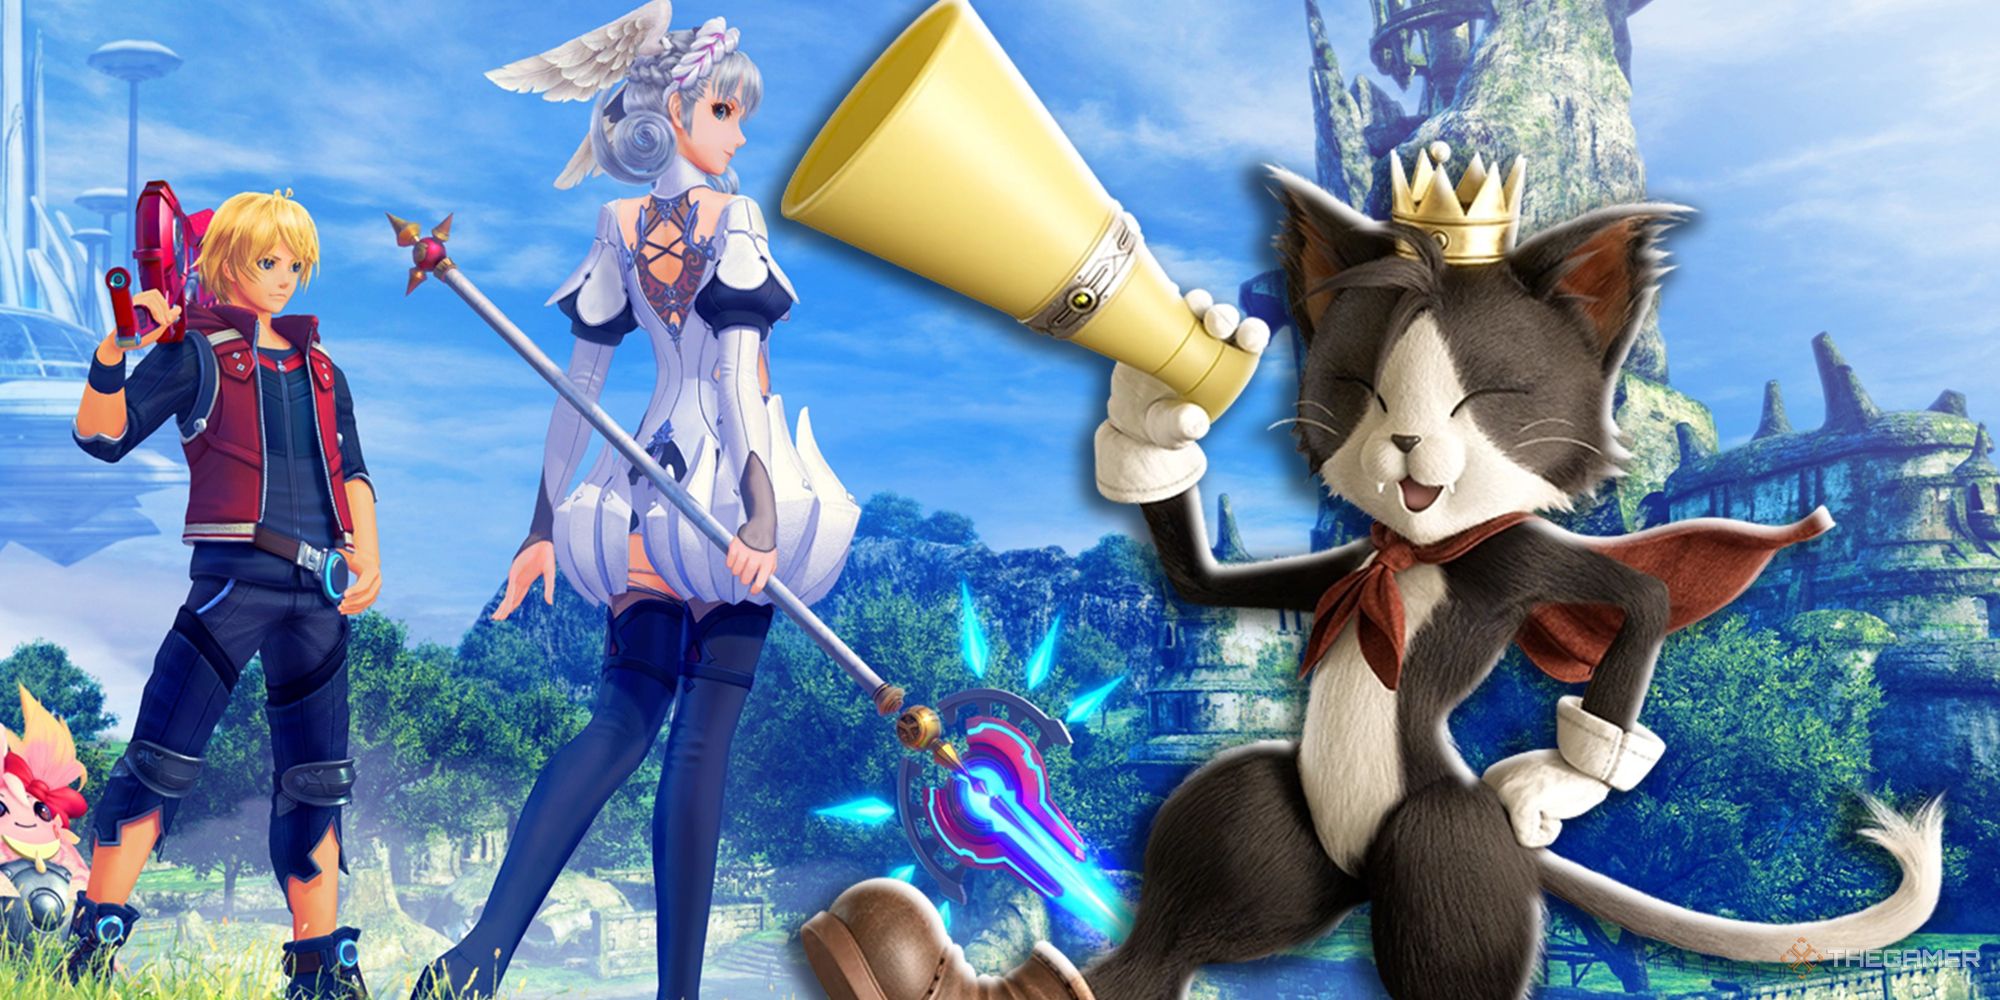 Cait Sith from Final Fantasy 7 Rebirth overlaid on Shulk and Melia in Xenoblade Chronicles